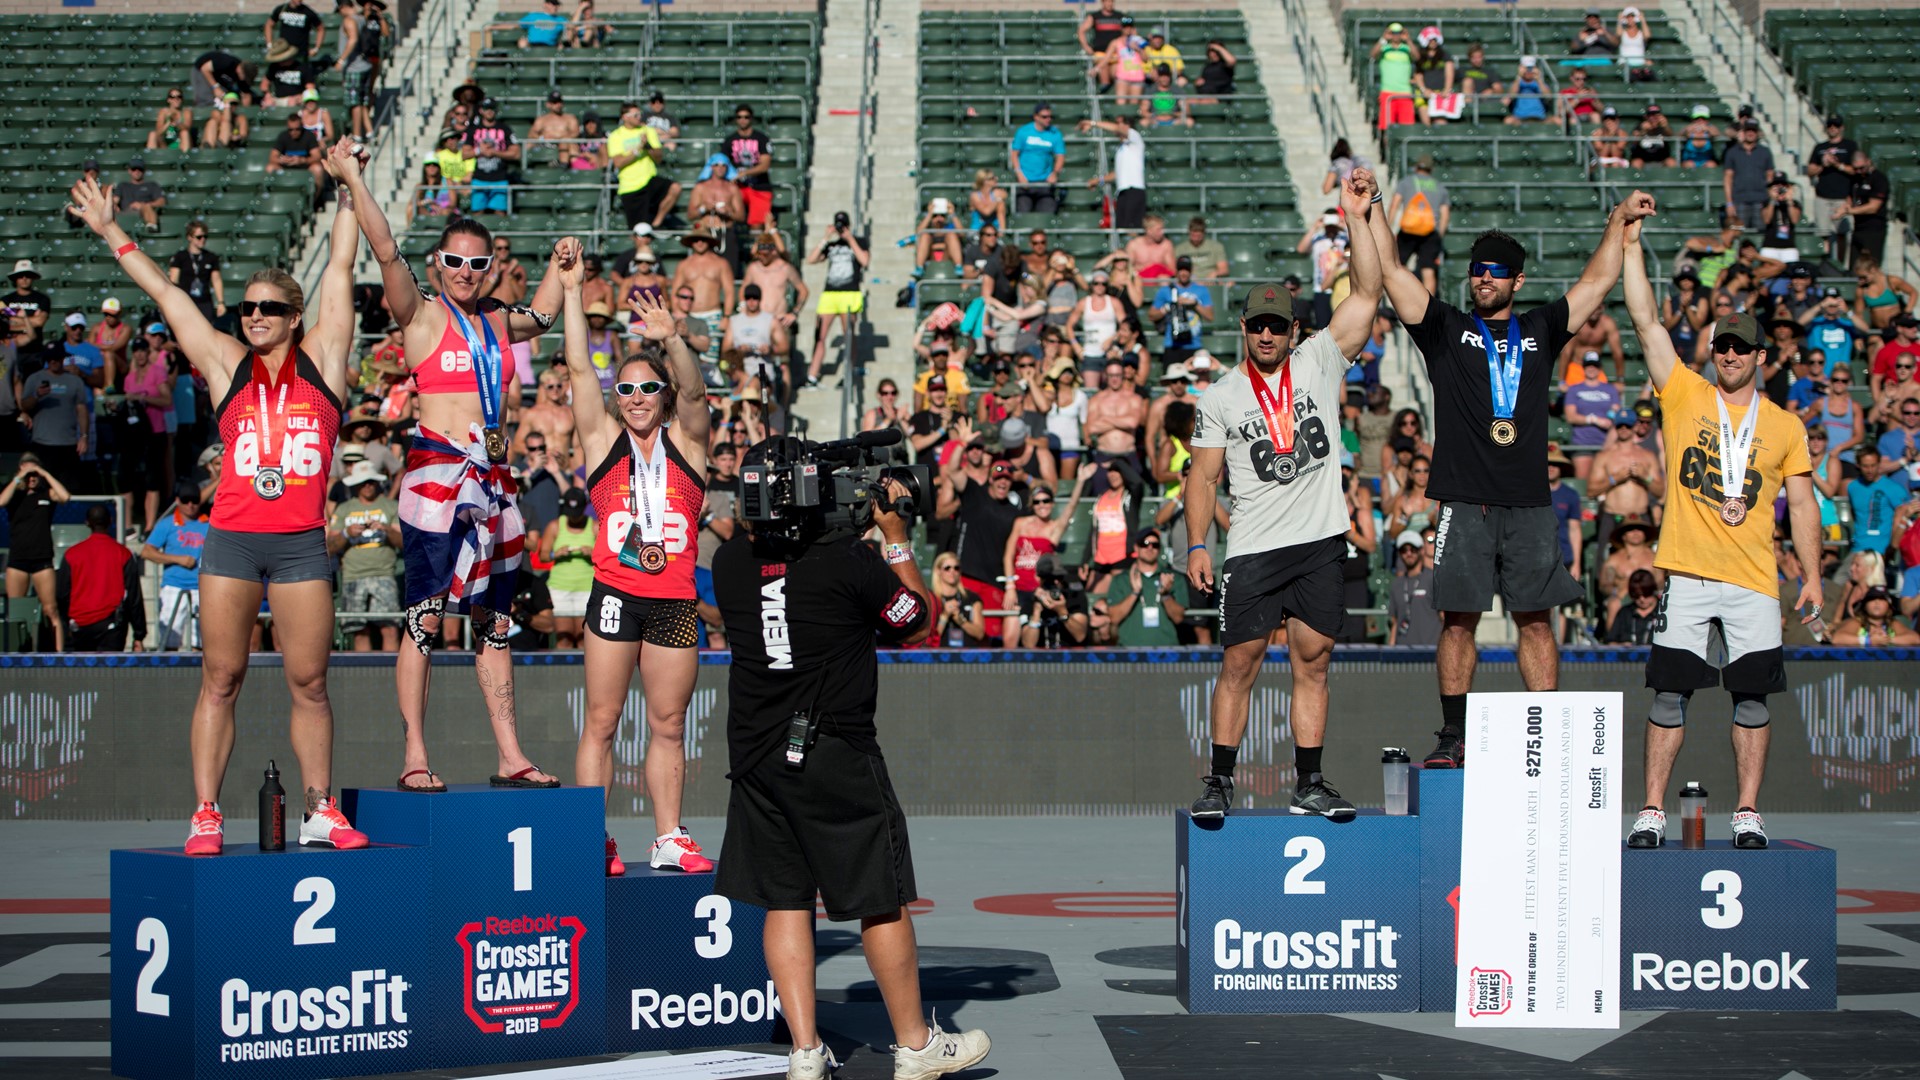 Increases Prize for CrossFit Games